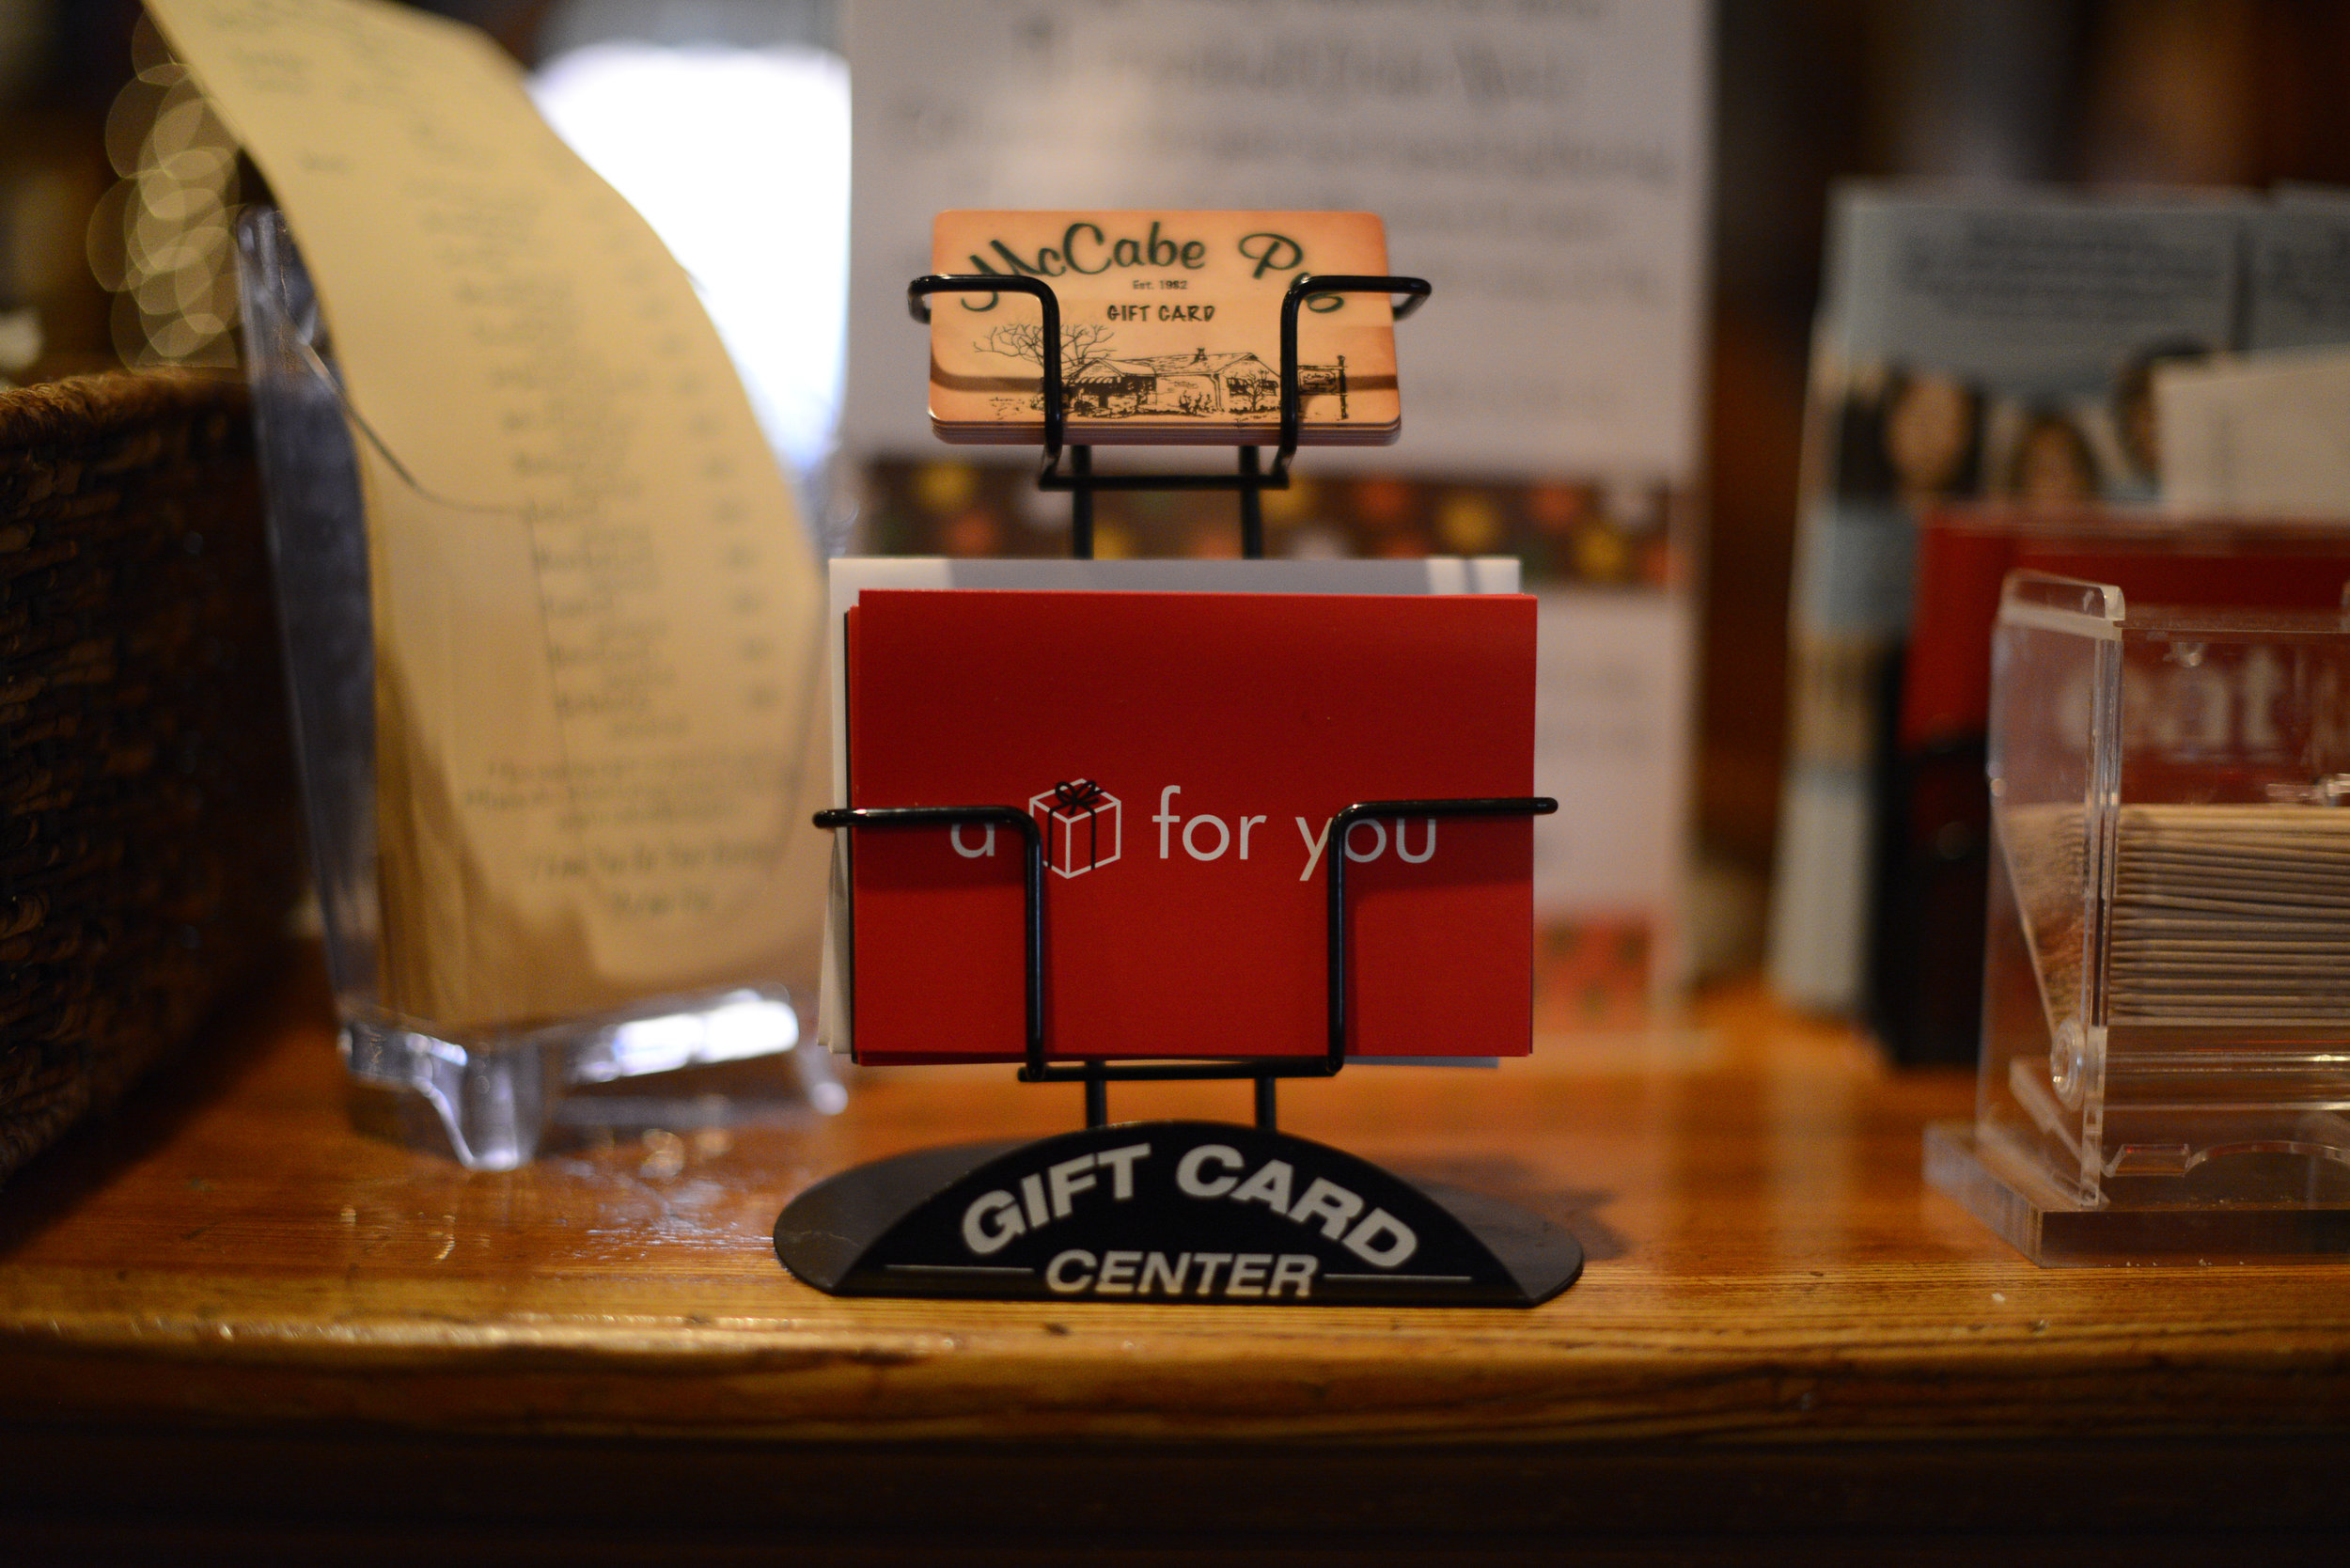 McCabe Pub Gift Cards and To-Go Menu